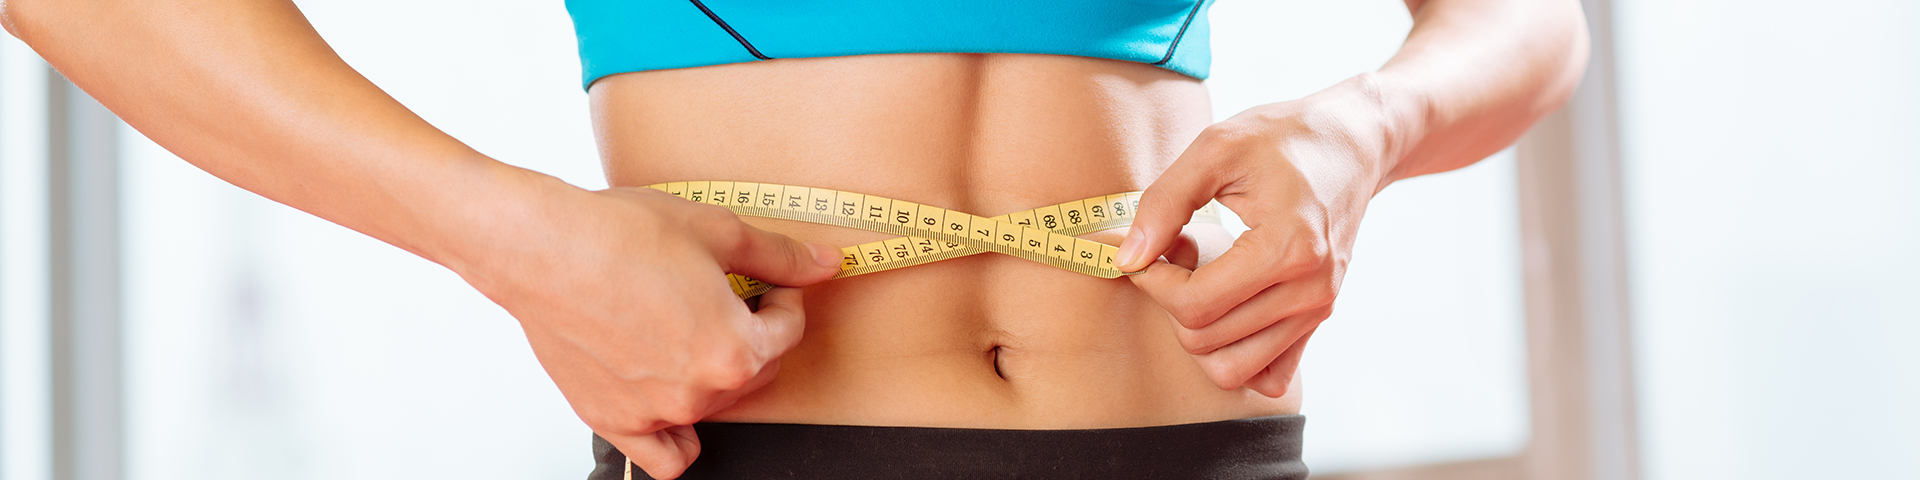 Immediate Fat Loss To Kick Off Your New Year!